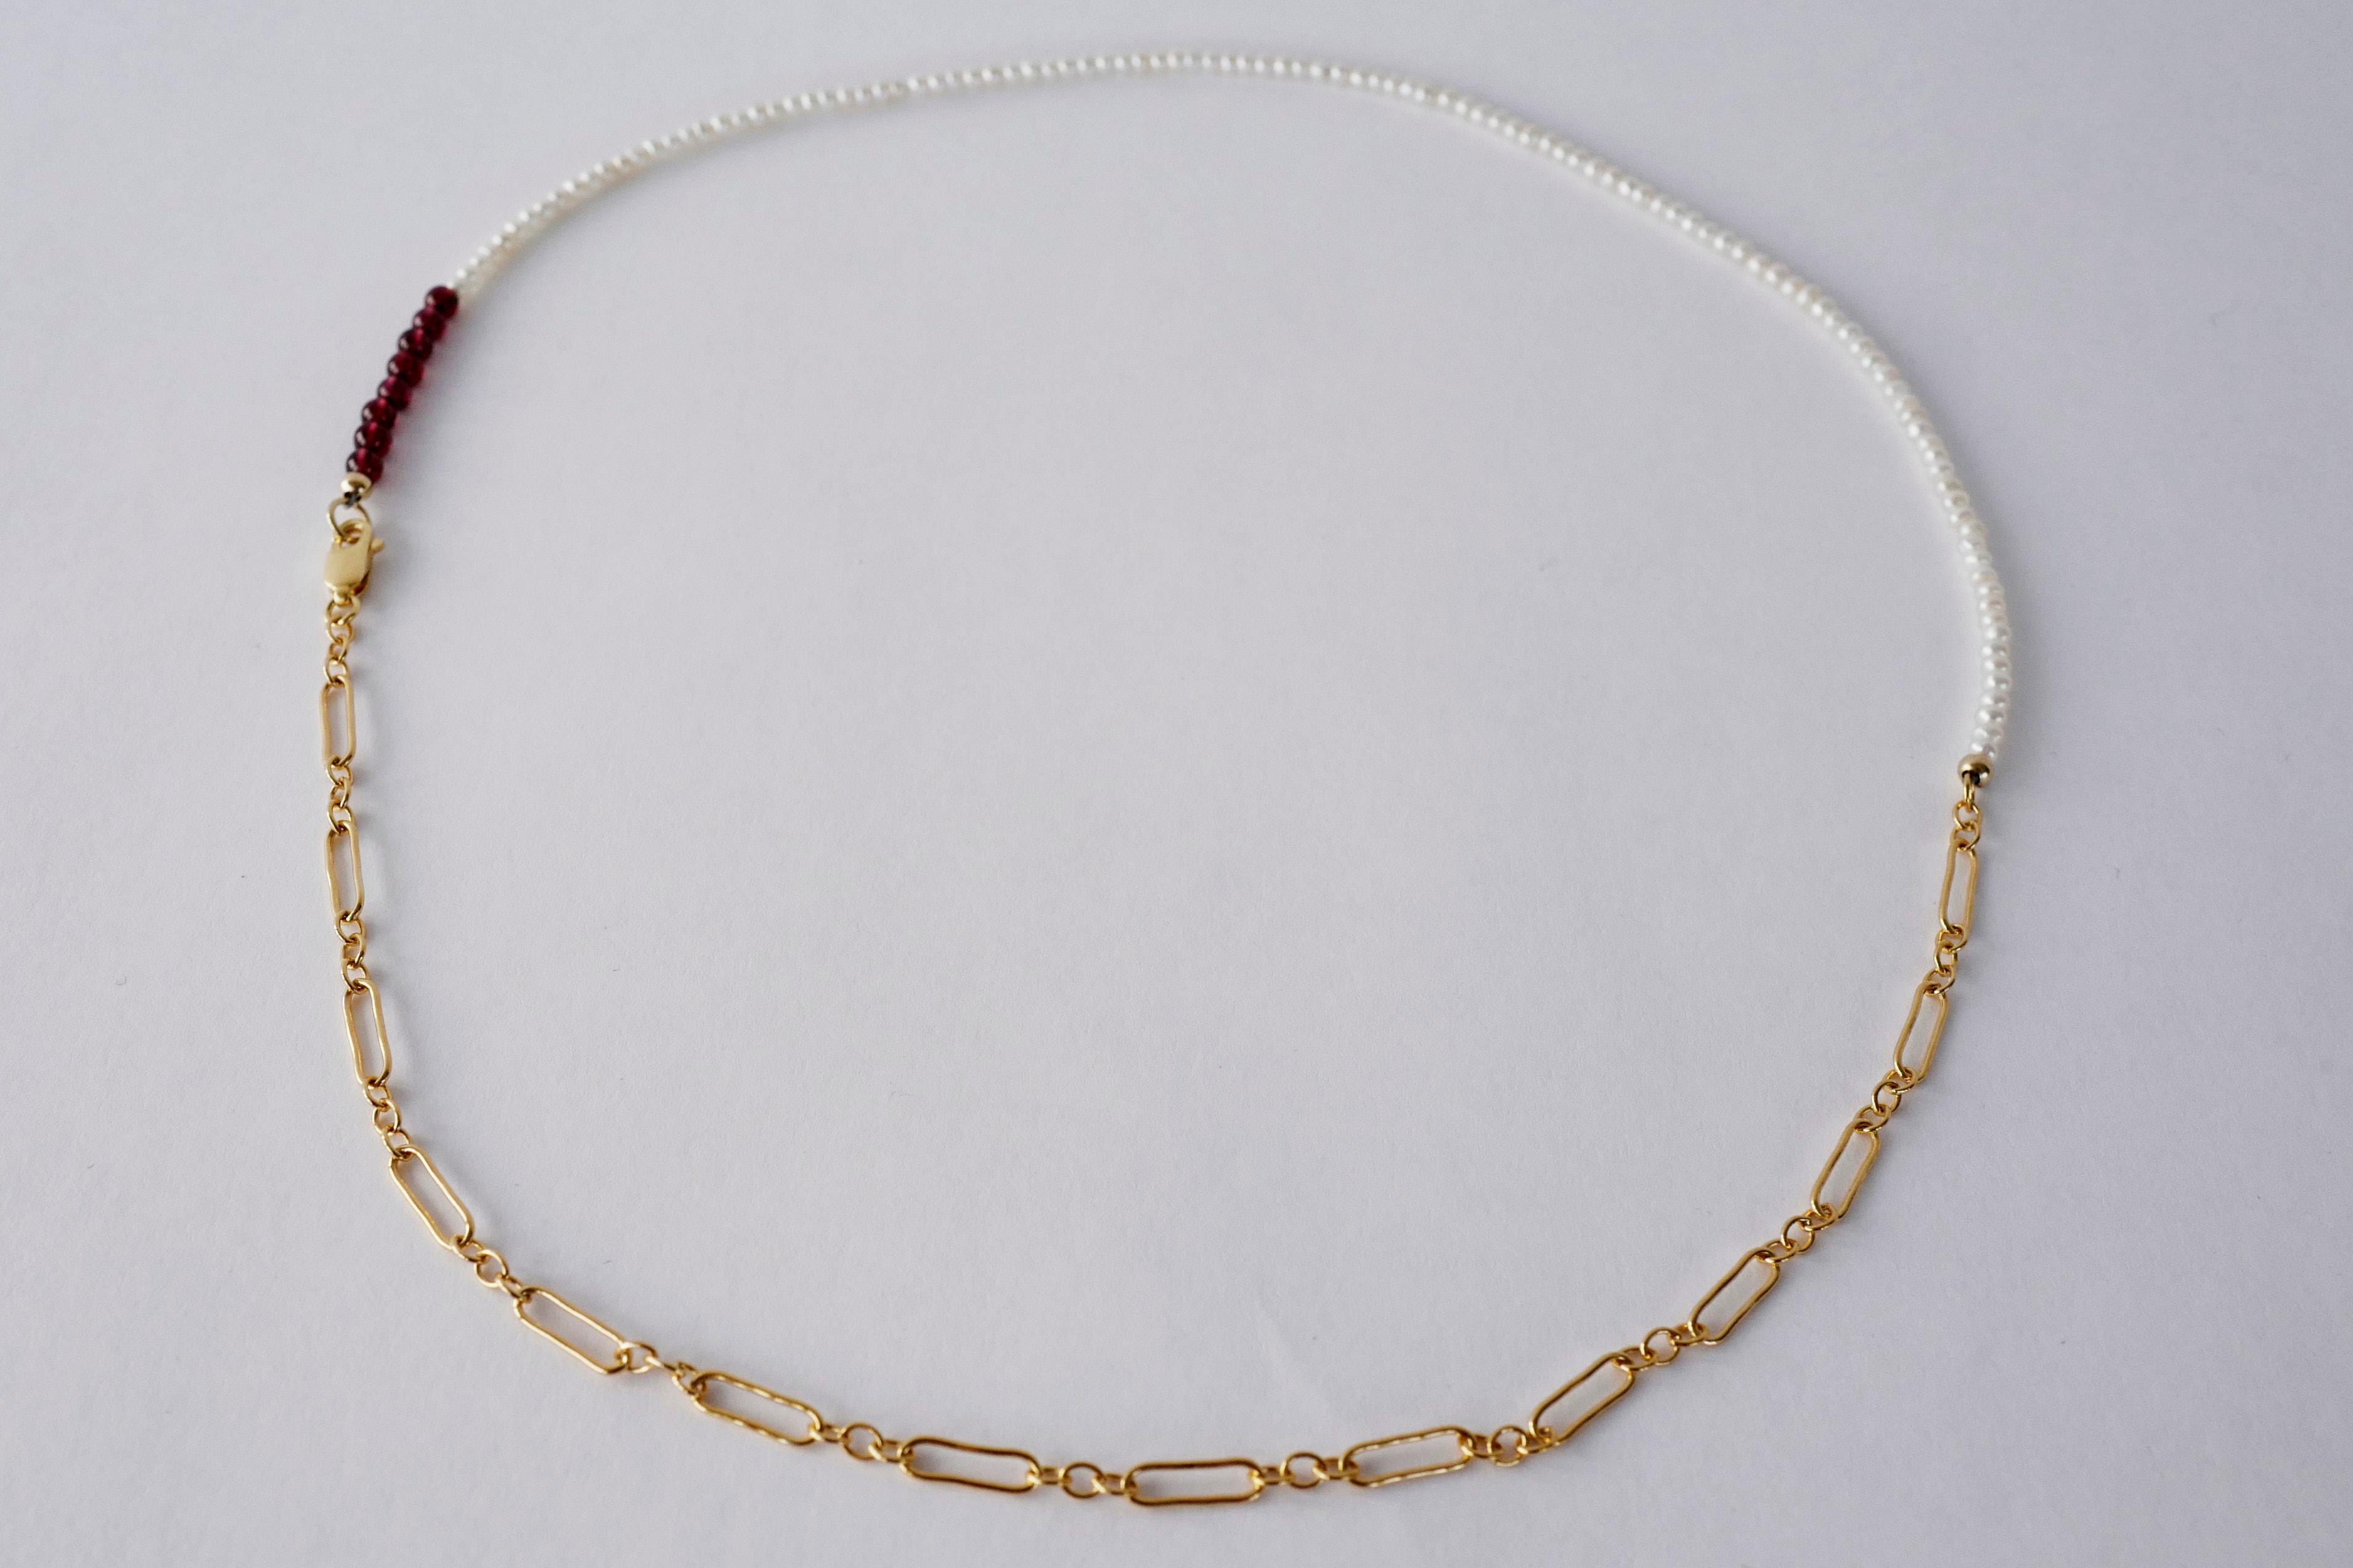 Romantic White Pearl Red Garnet Choker Bead Necklace Gold Filled Chain 20